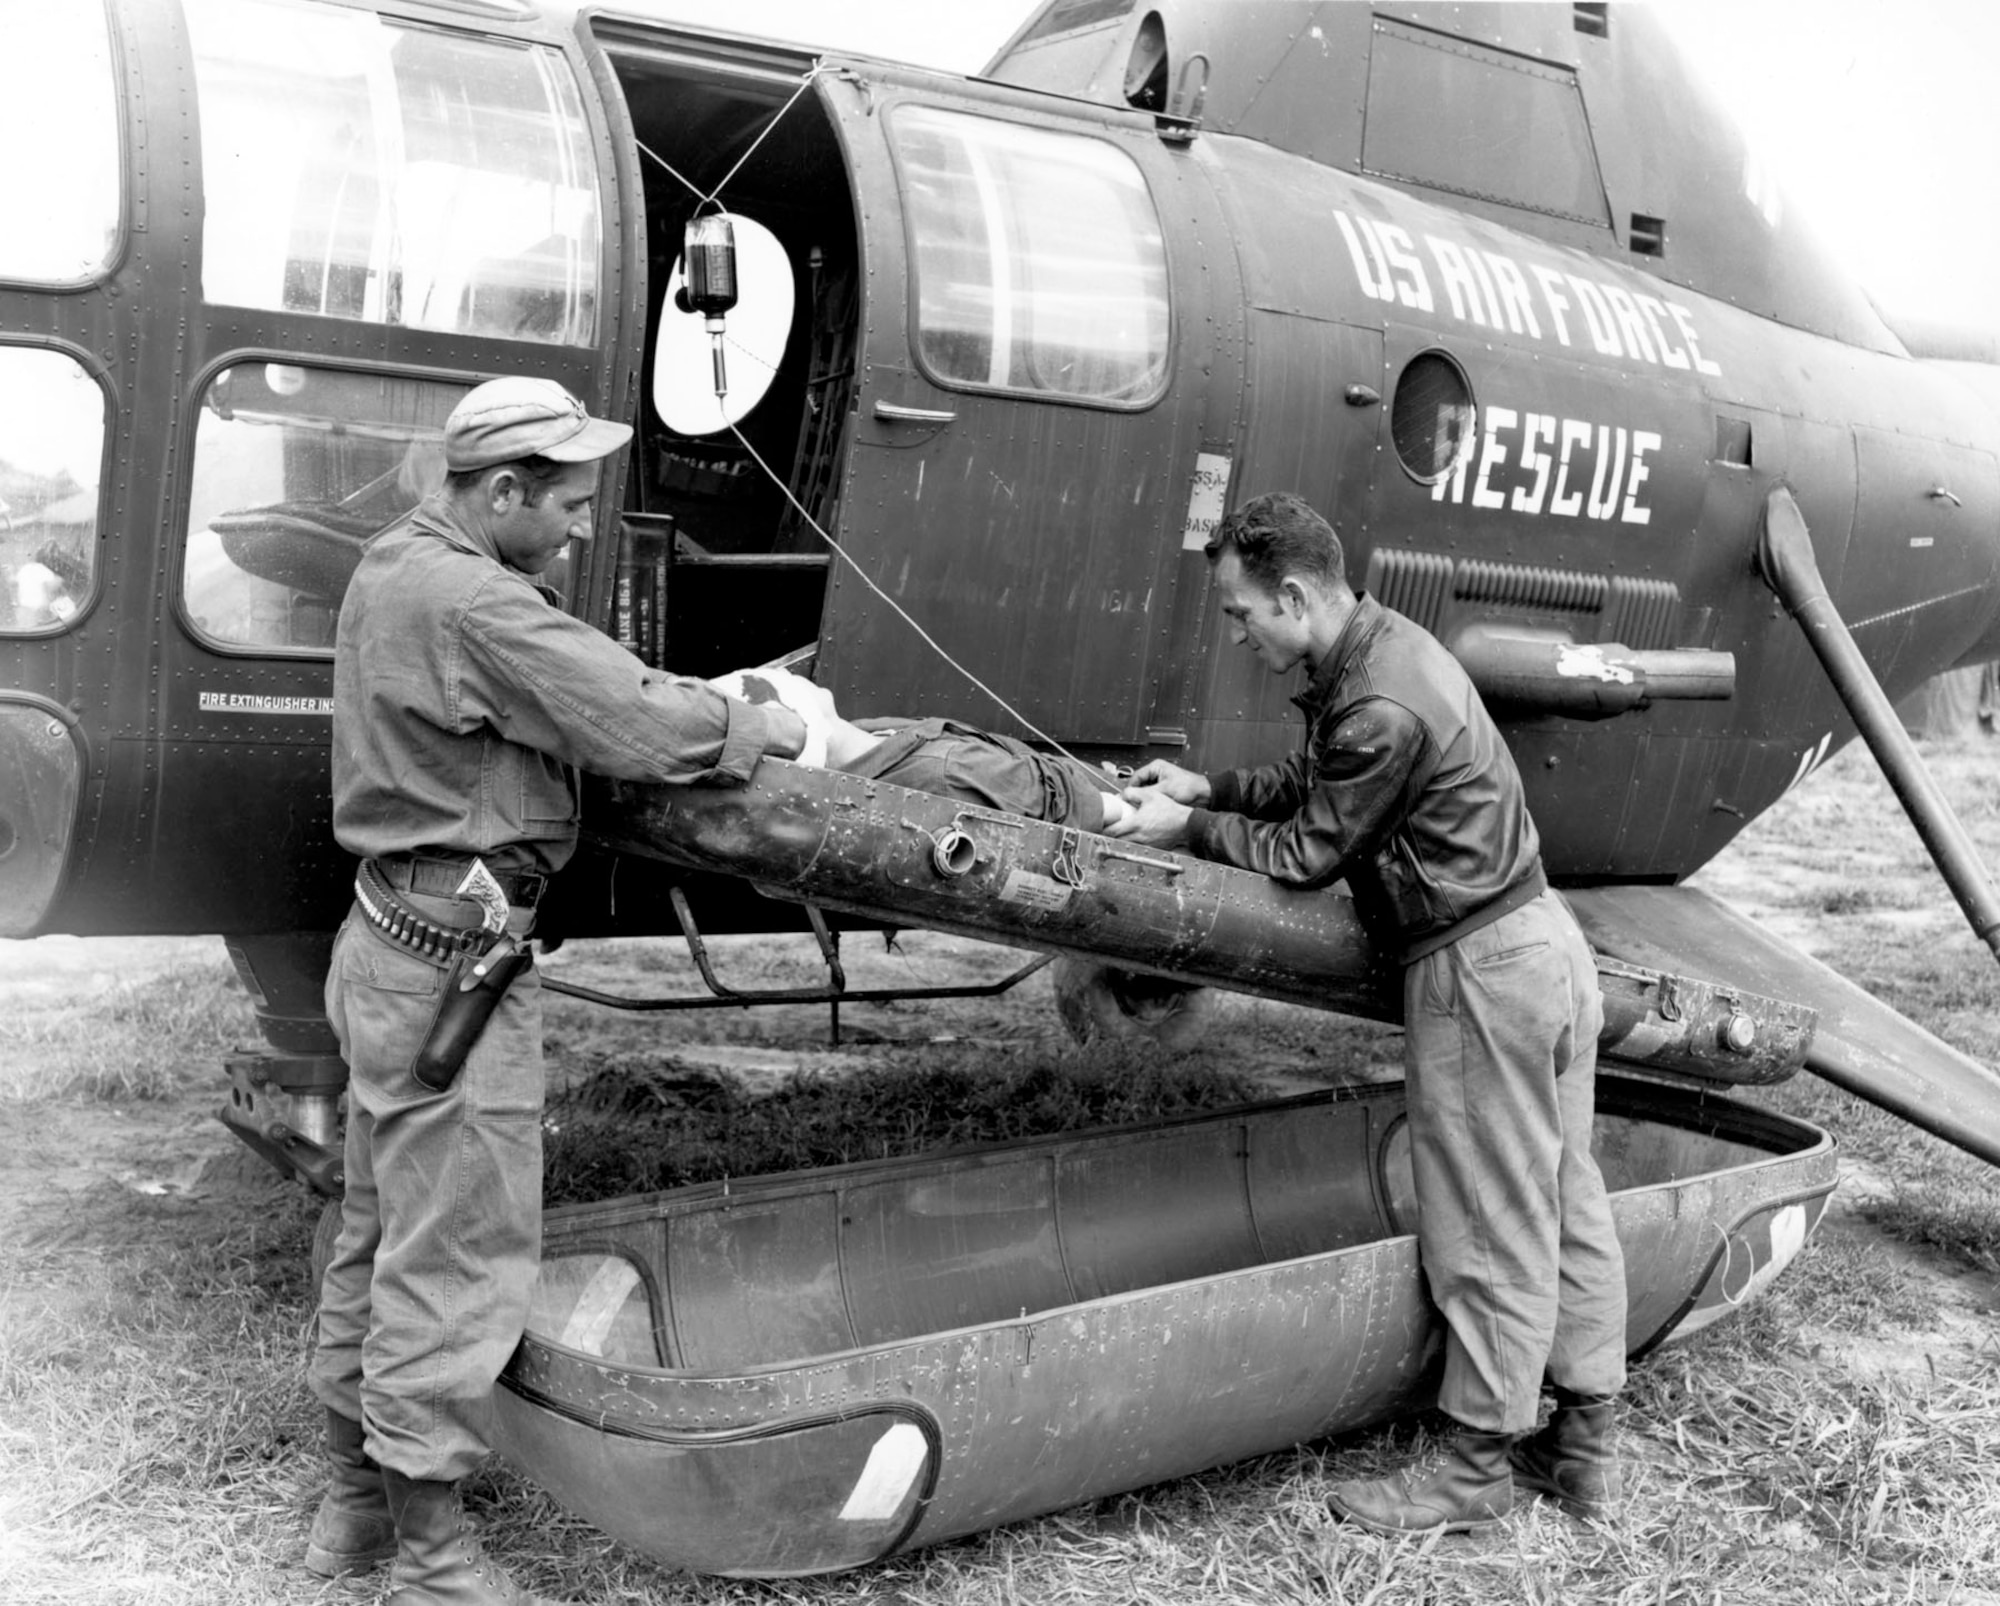 An Air Rescue Service crew treats a wounded UN soldier on one of an H-5G helicopter’s two outboard litters. Note the whole blood hanging in the door, and the litter cover on the ground. (U.S. Air Force photo)